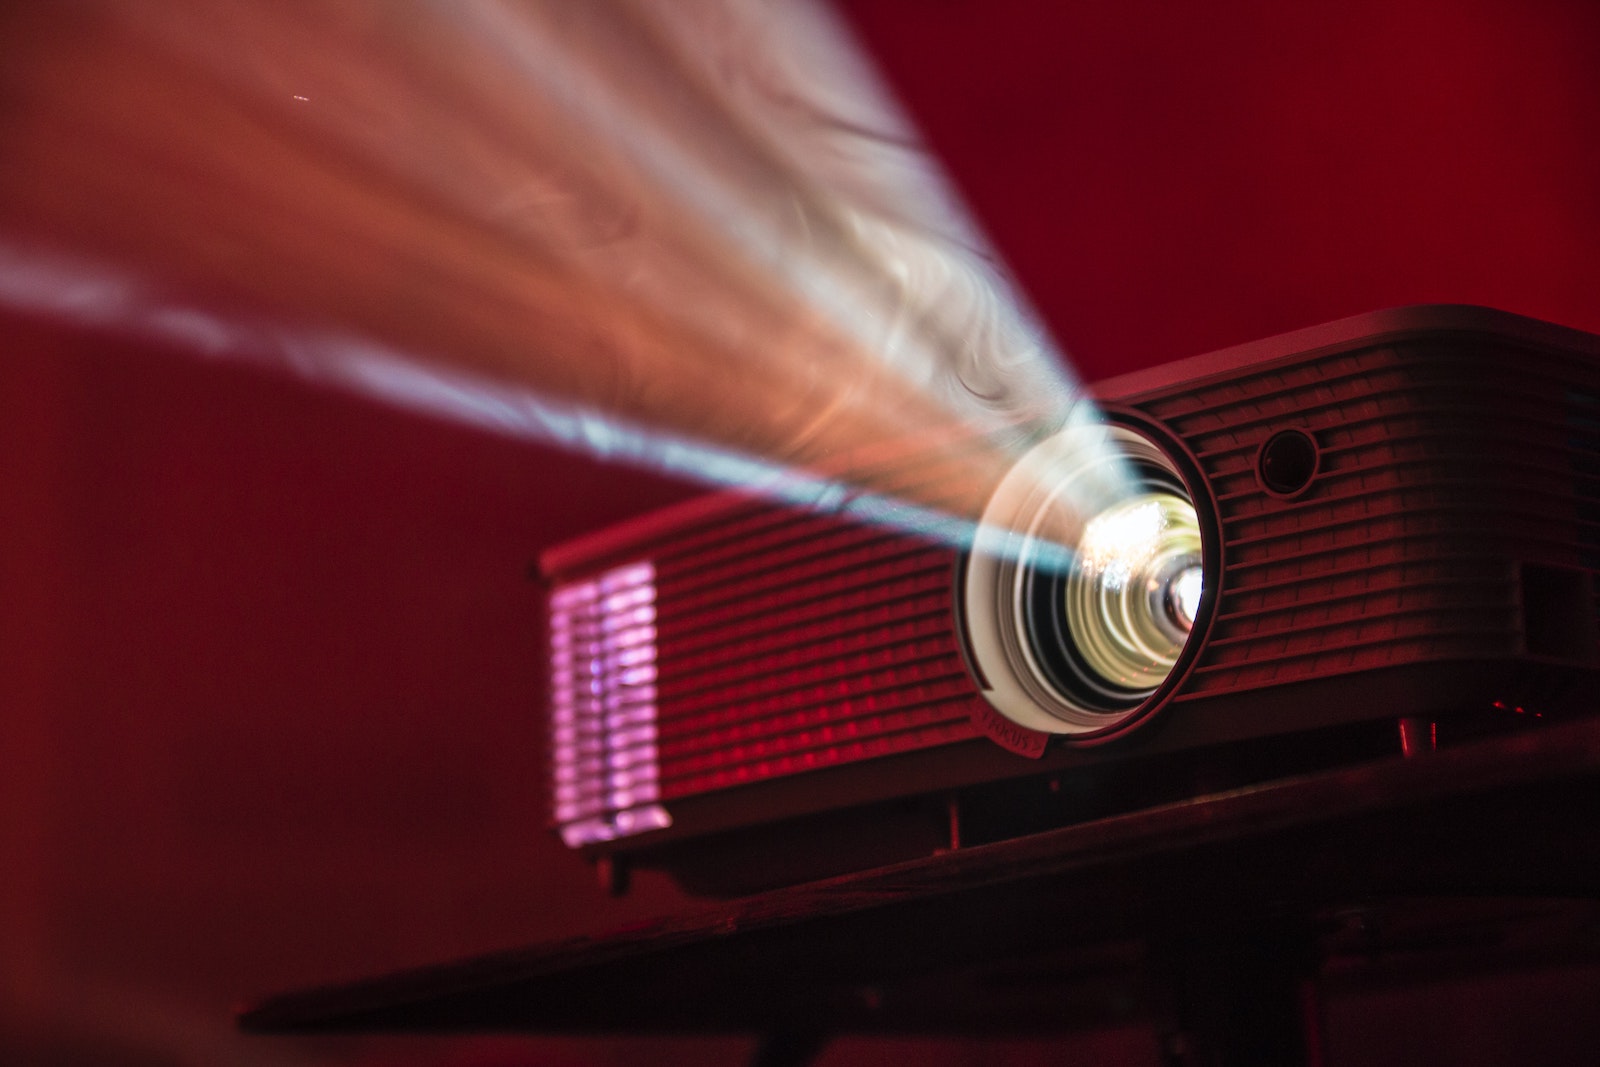 Close up of a projector in a red-lit room turned on revealing smoke in the light